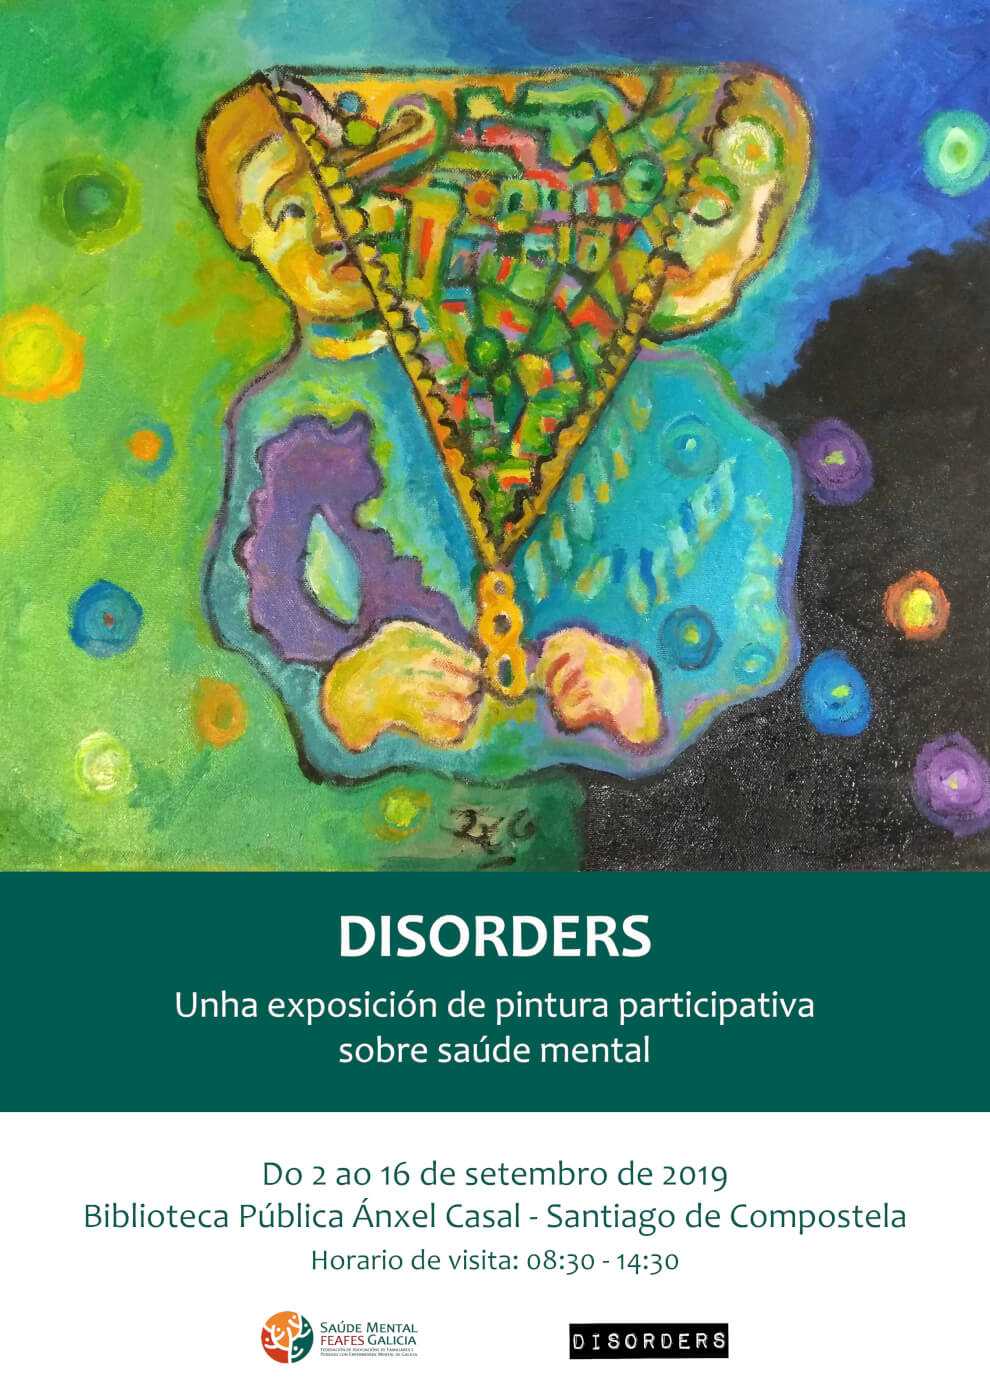 Disorders, a collaborative exhibition about mental health